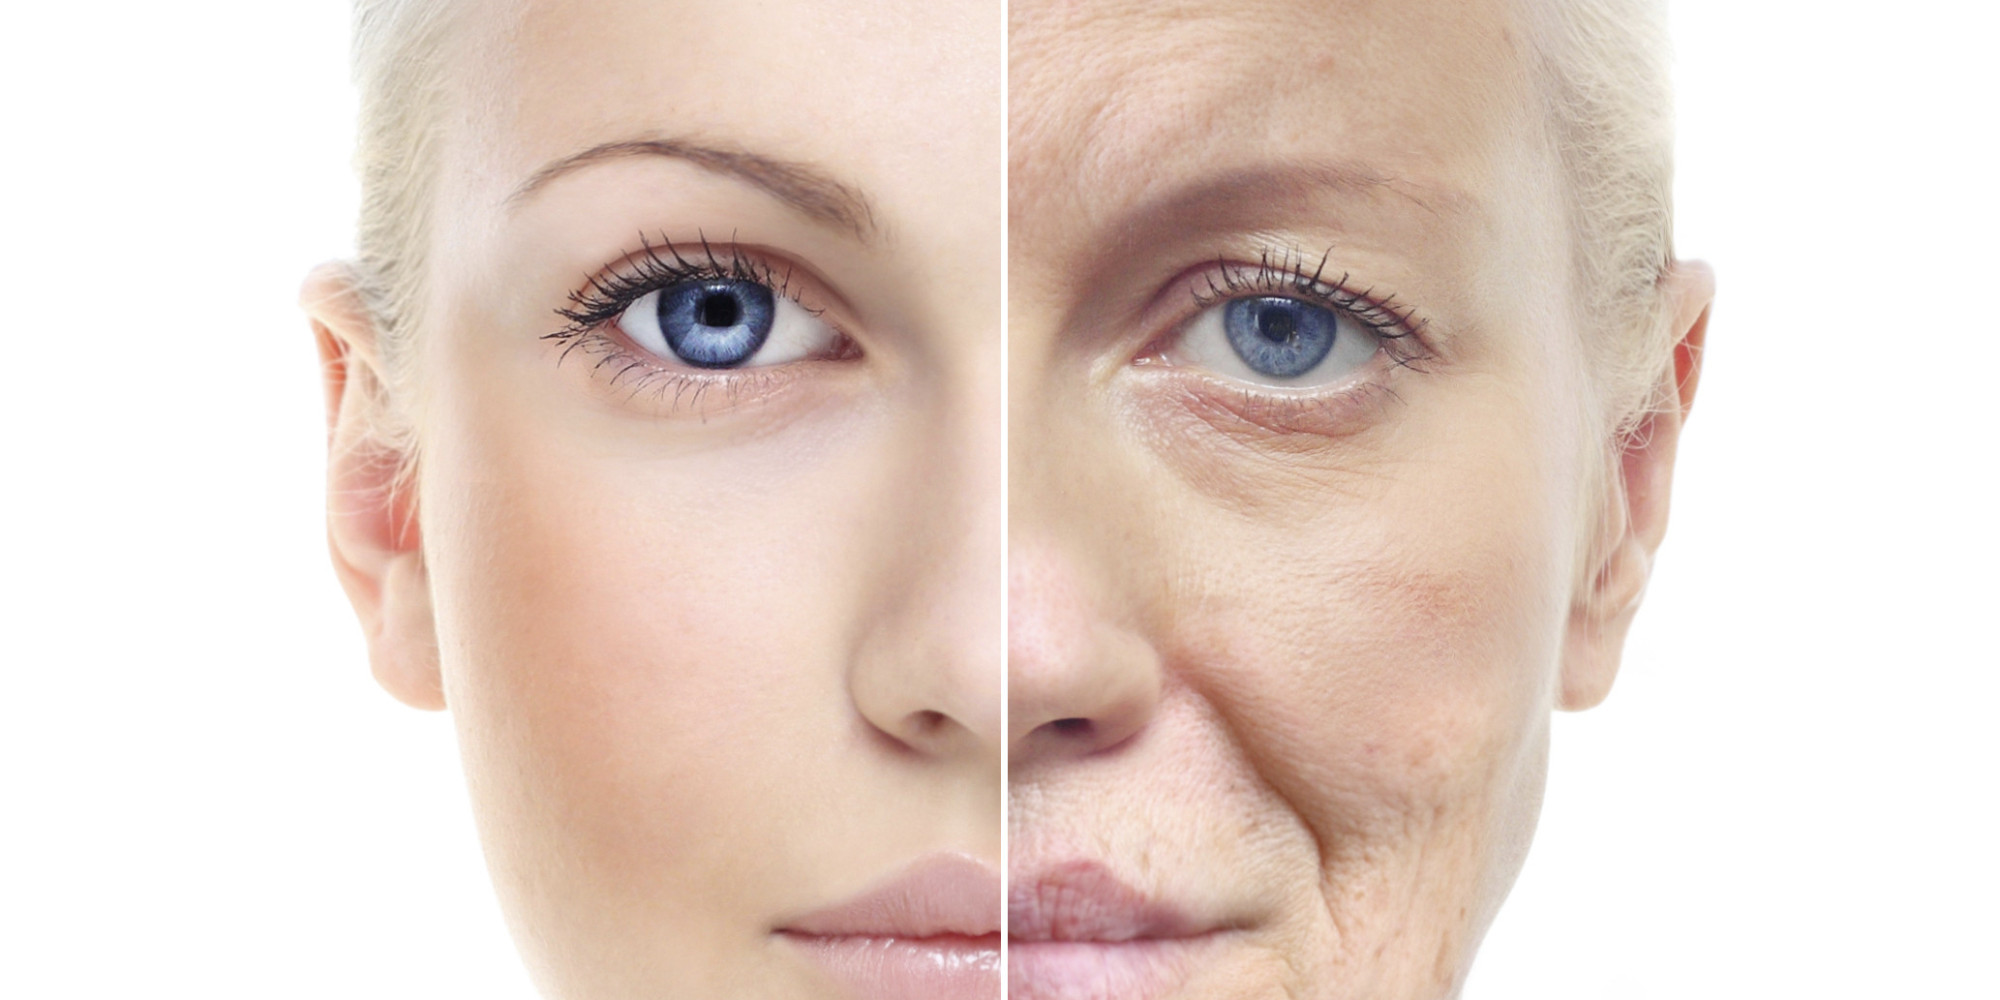 How Fast Are You Aging? - Ask Dr. Weil